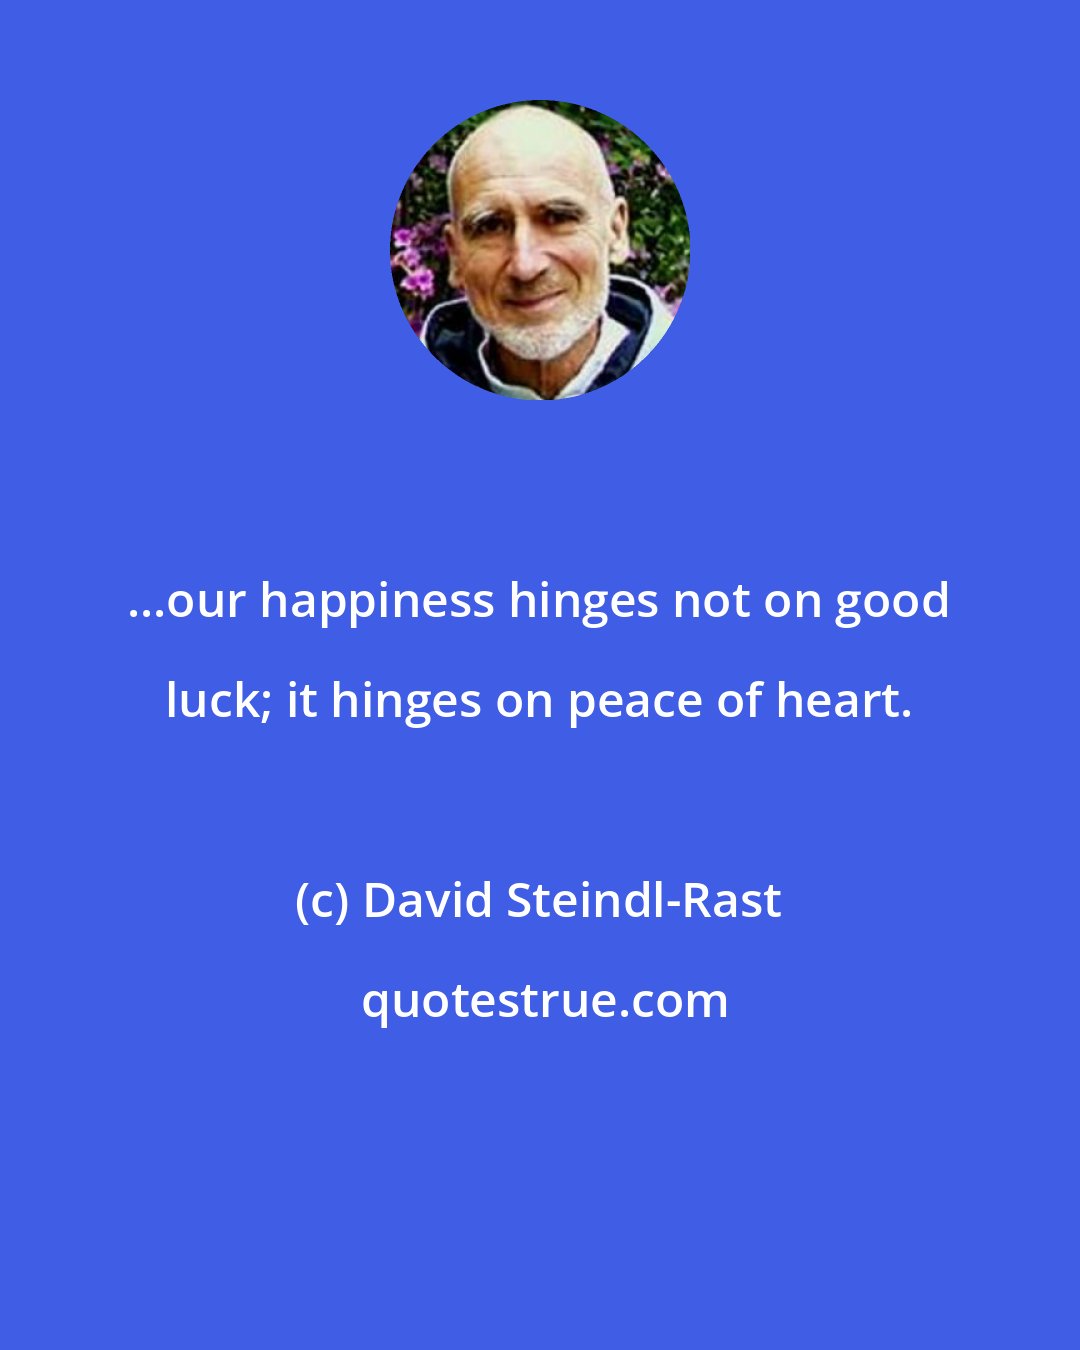 David Steindl-Rast: ...our happiness hinges not on good luck; it hinges on peace of heart.